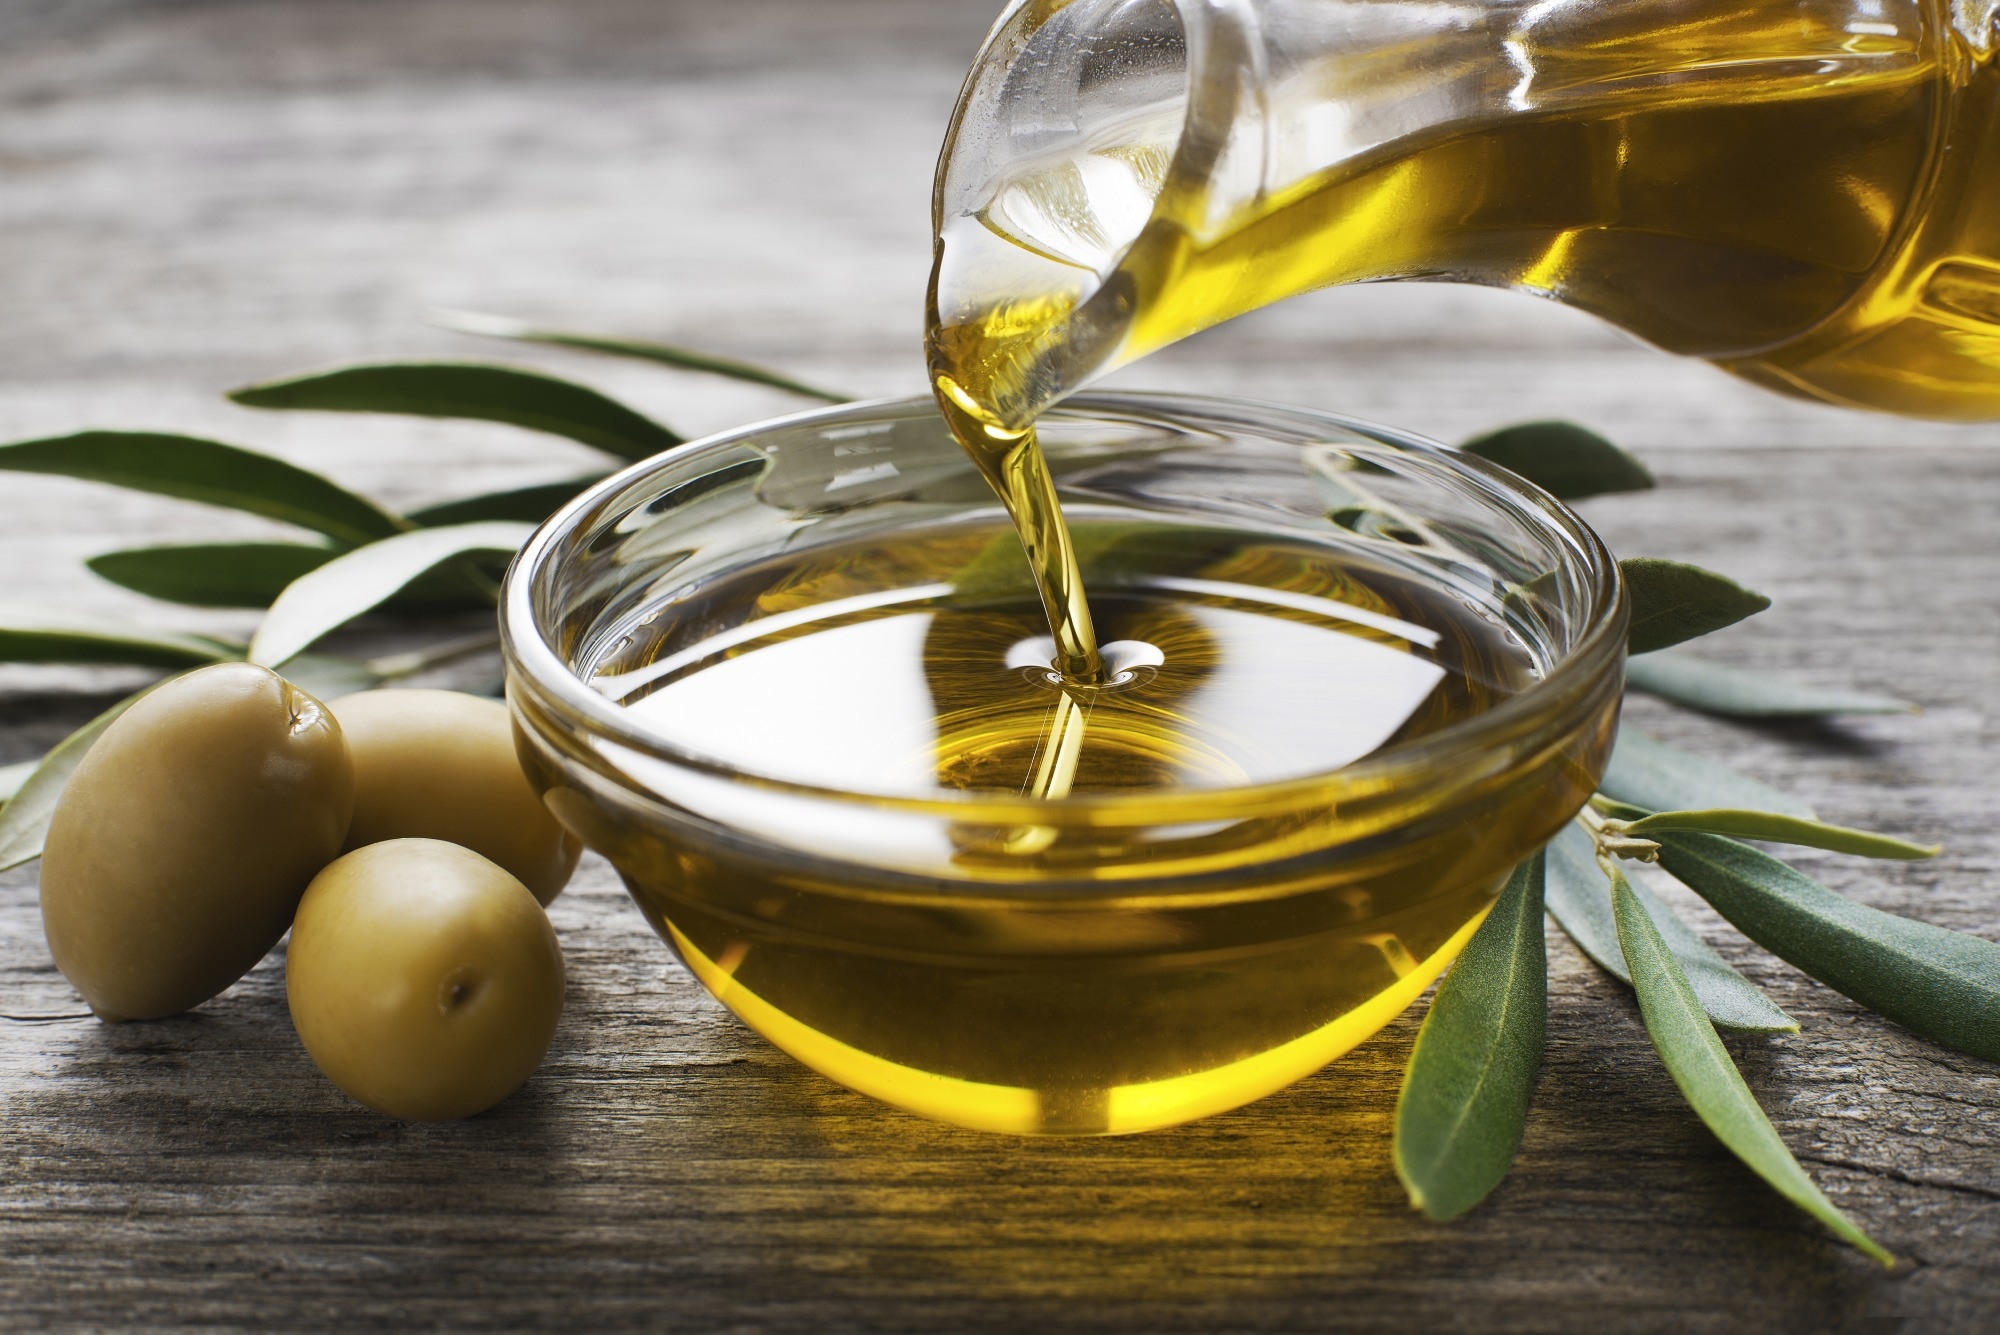 Study evaluates the effects of phenolic compounds in extra virgin olive oil  on skin health